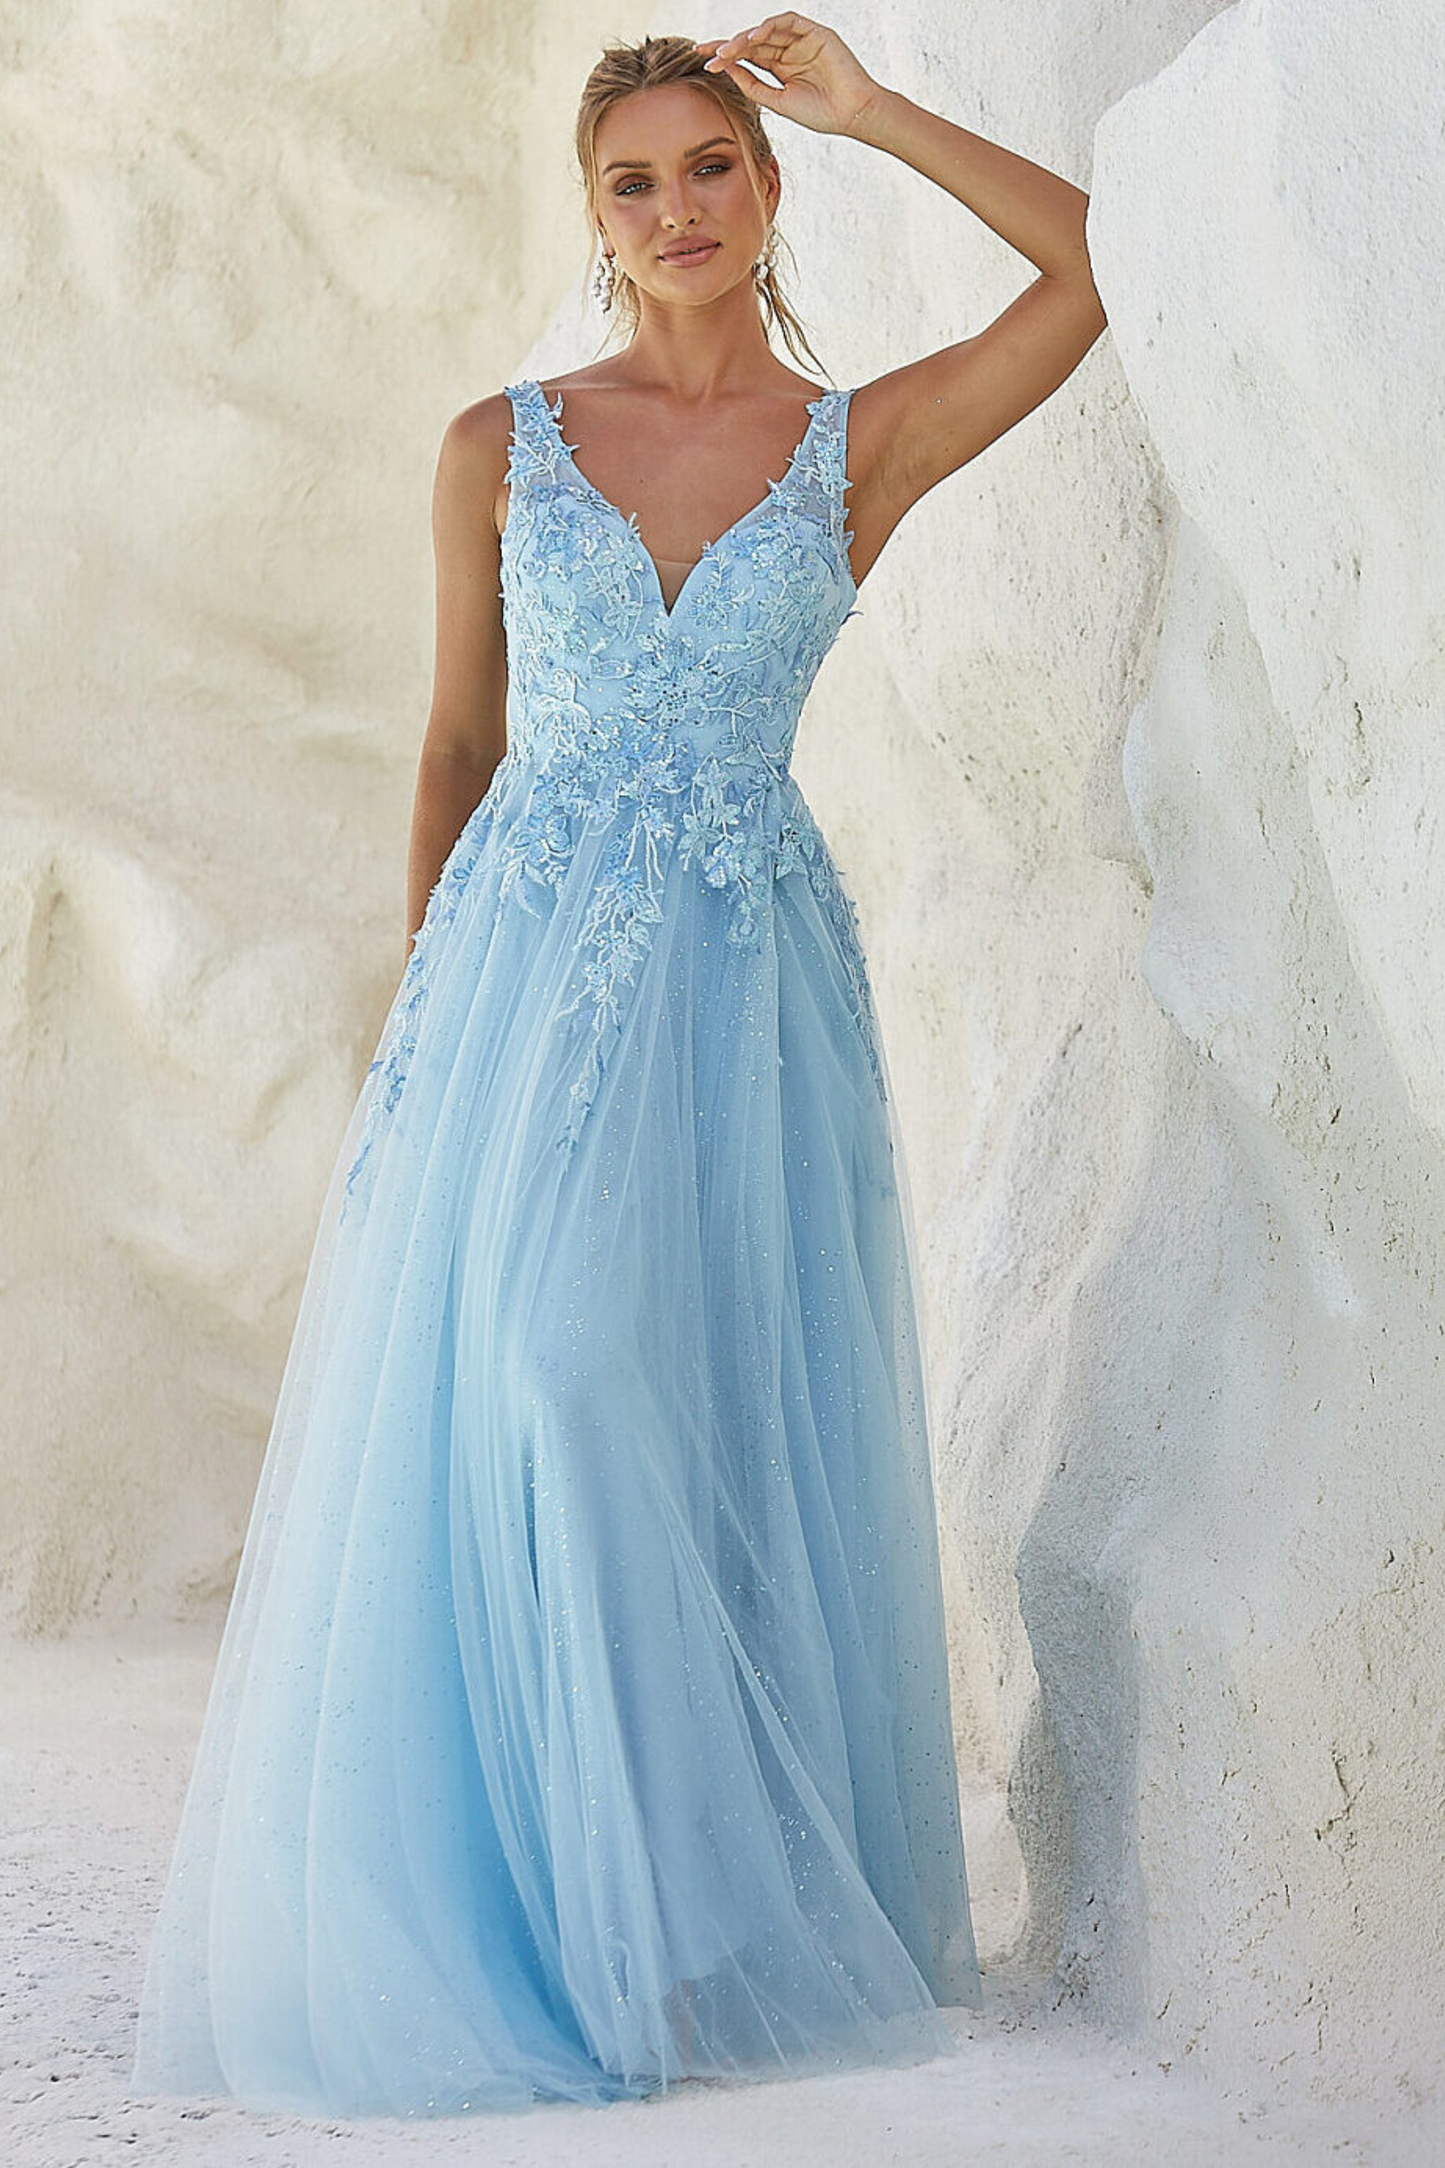 Tania Olsen a-line formal dress in pale blue with lace and glitter tulle